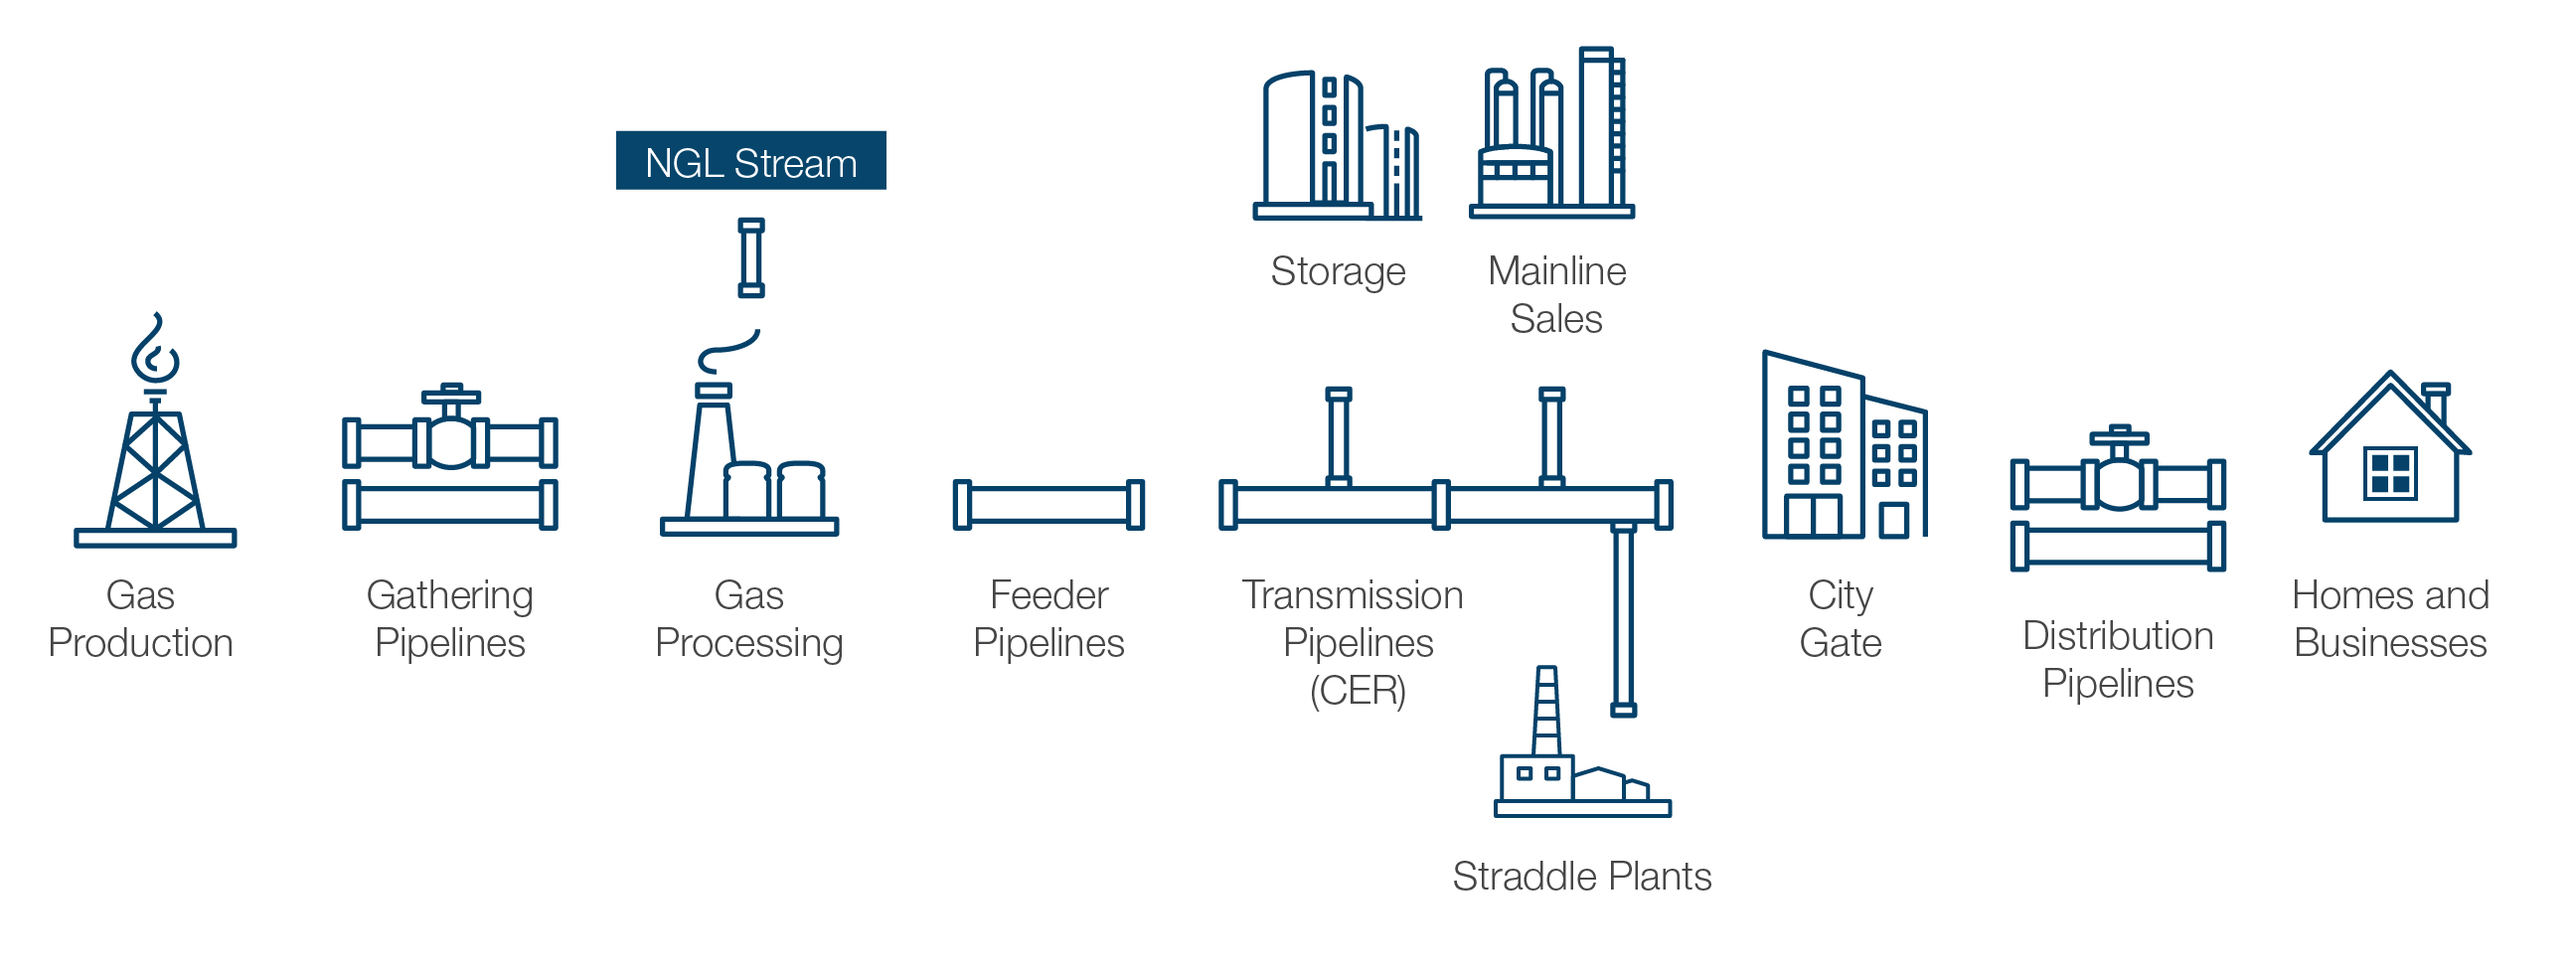 Gas Pipeline System Overview